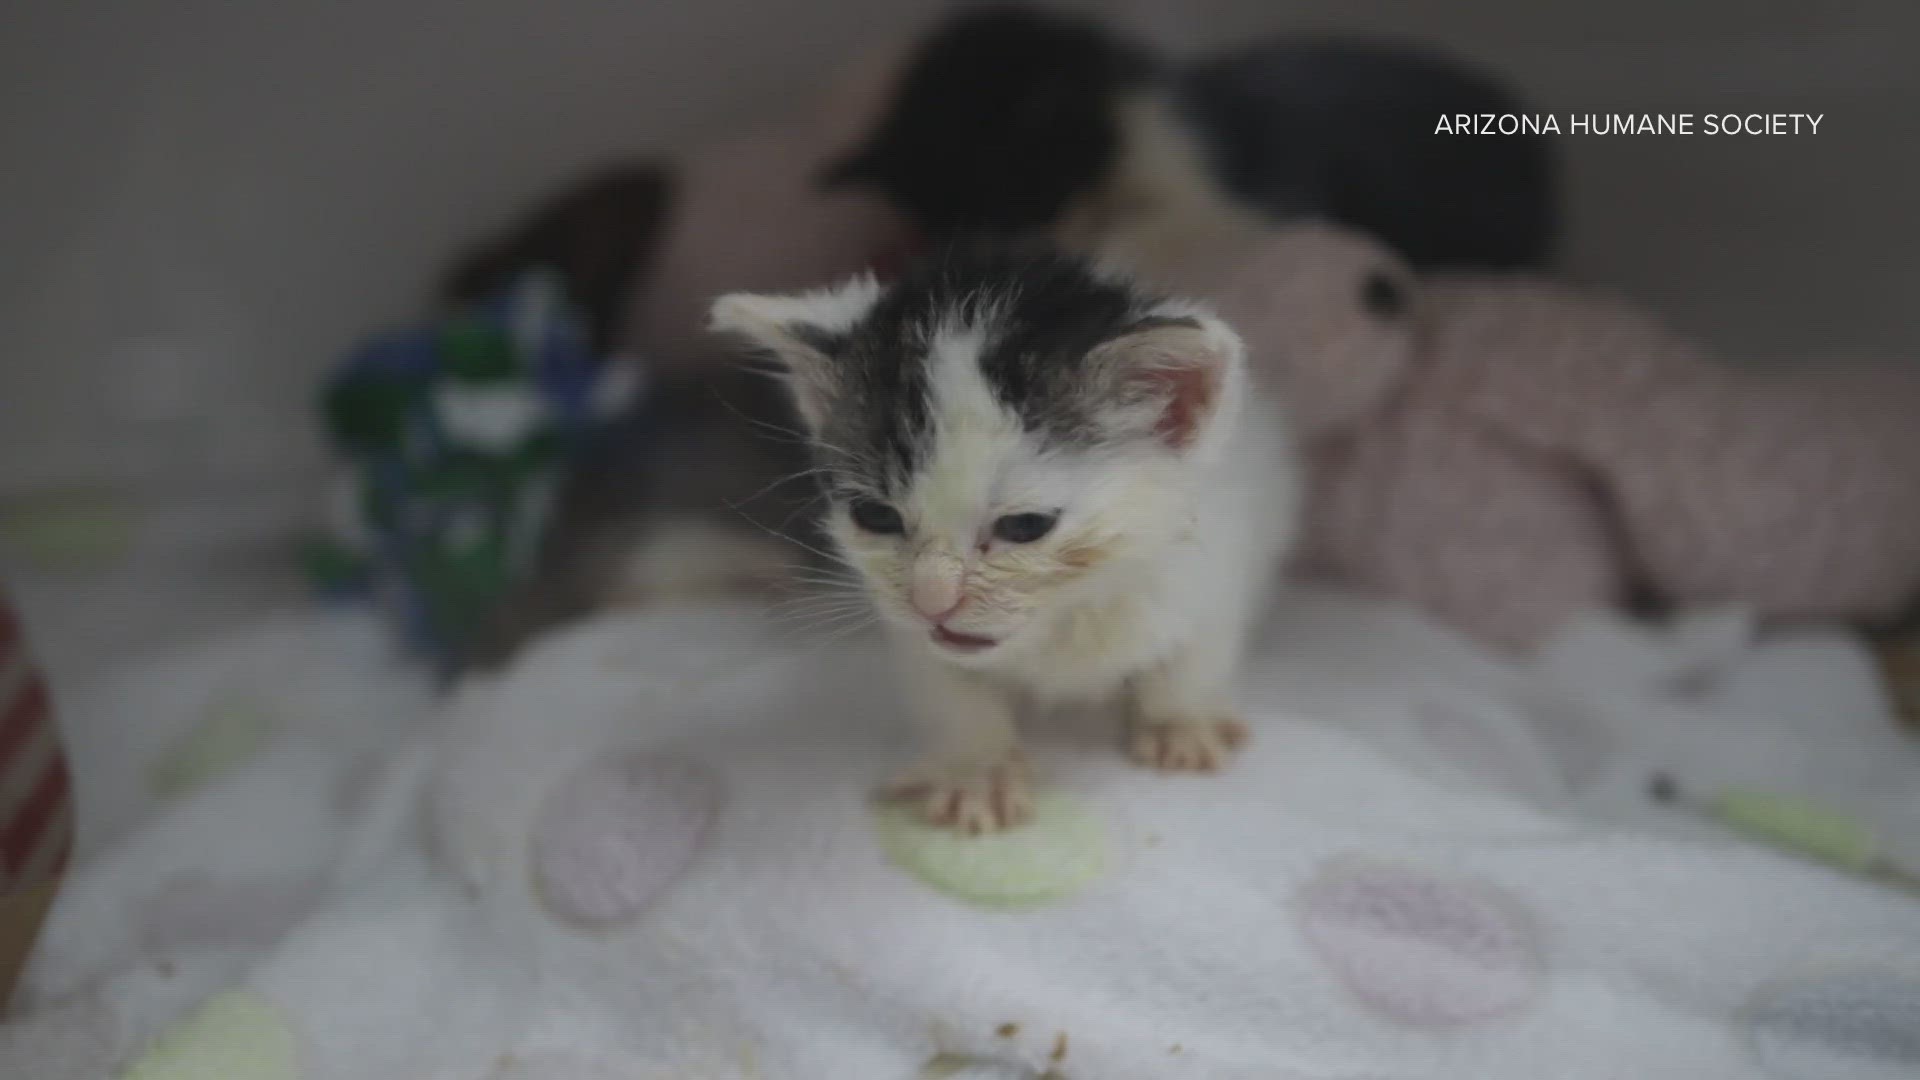 More than 75 kittens are being cared for at the ICU which has a maximum capacity of 54, according to the humane society.